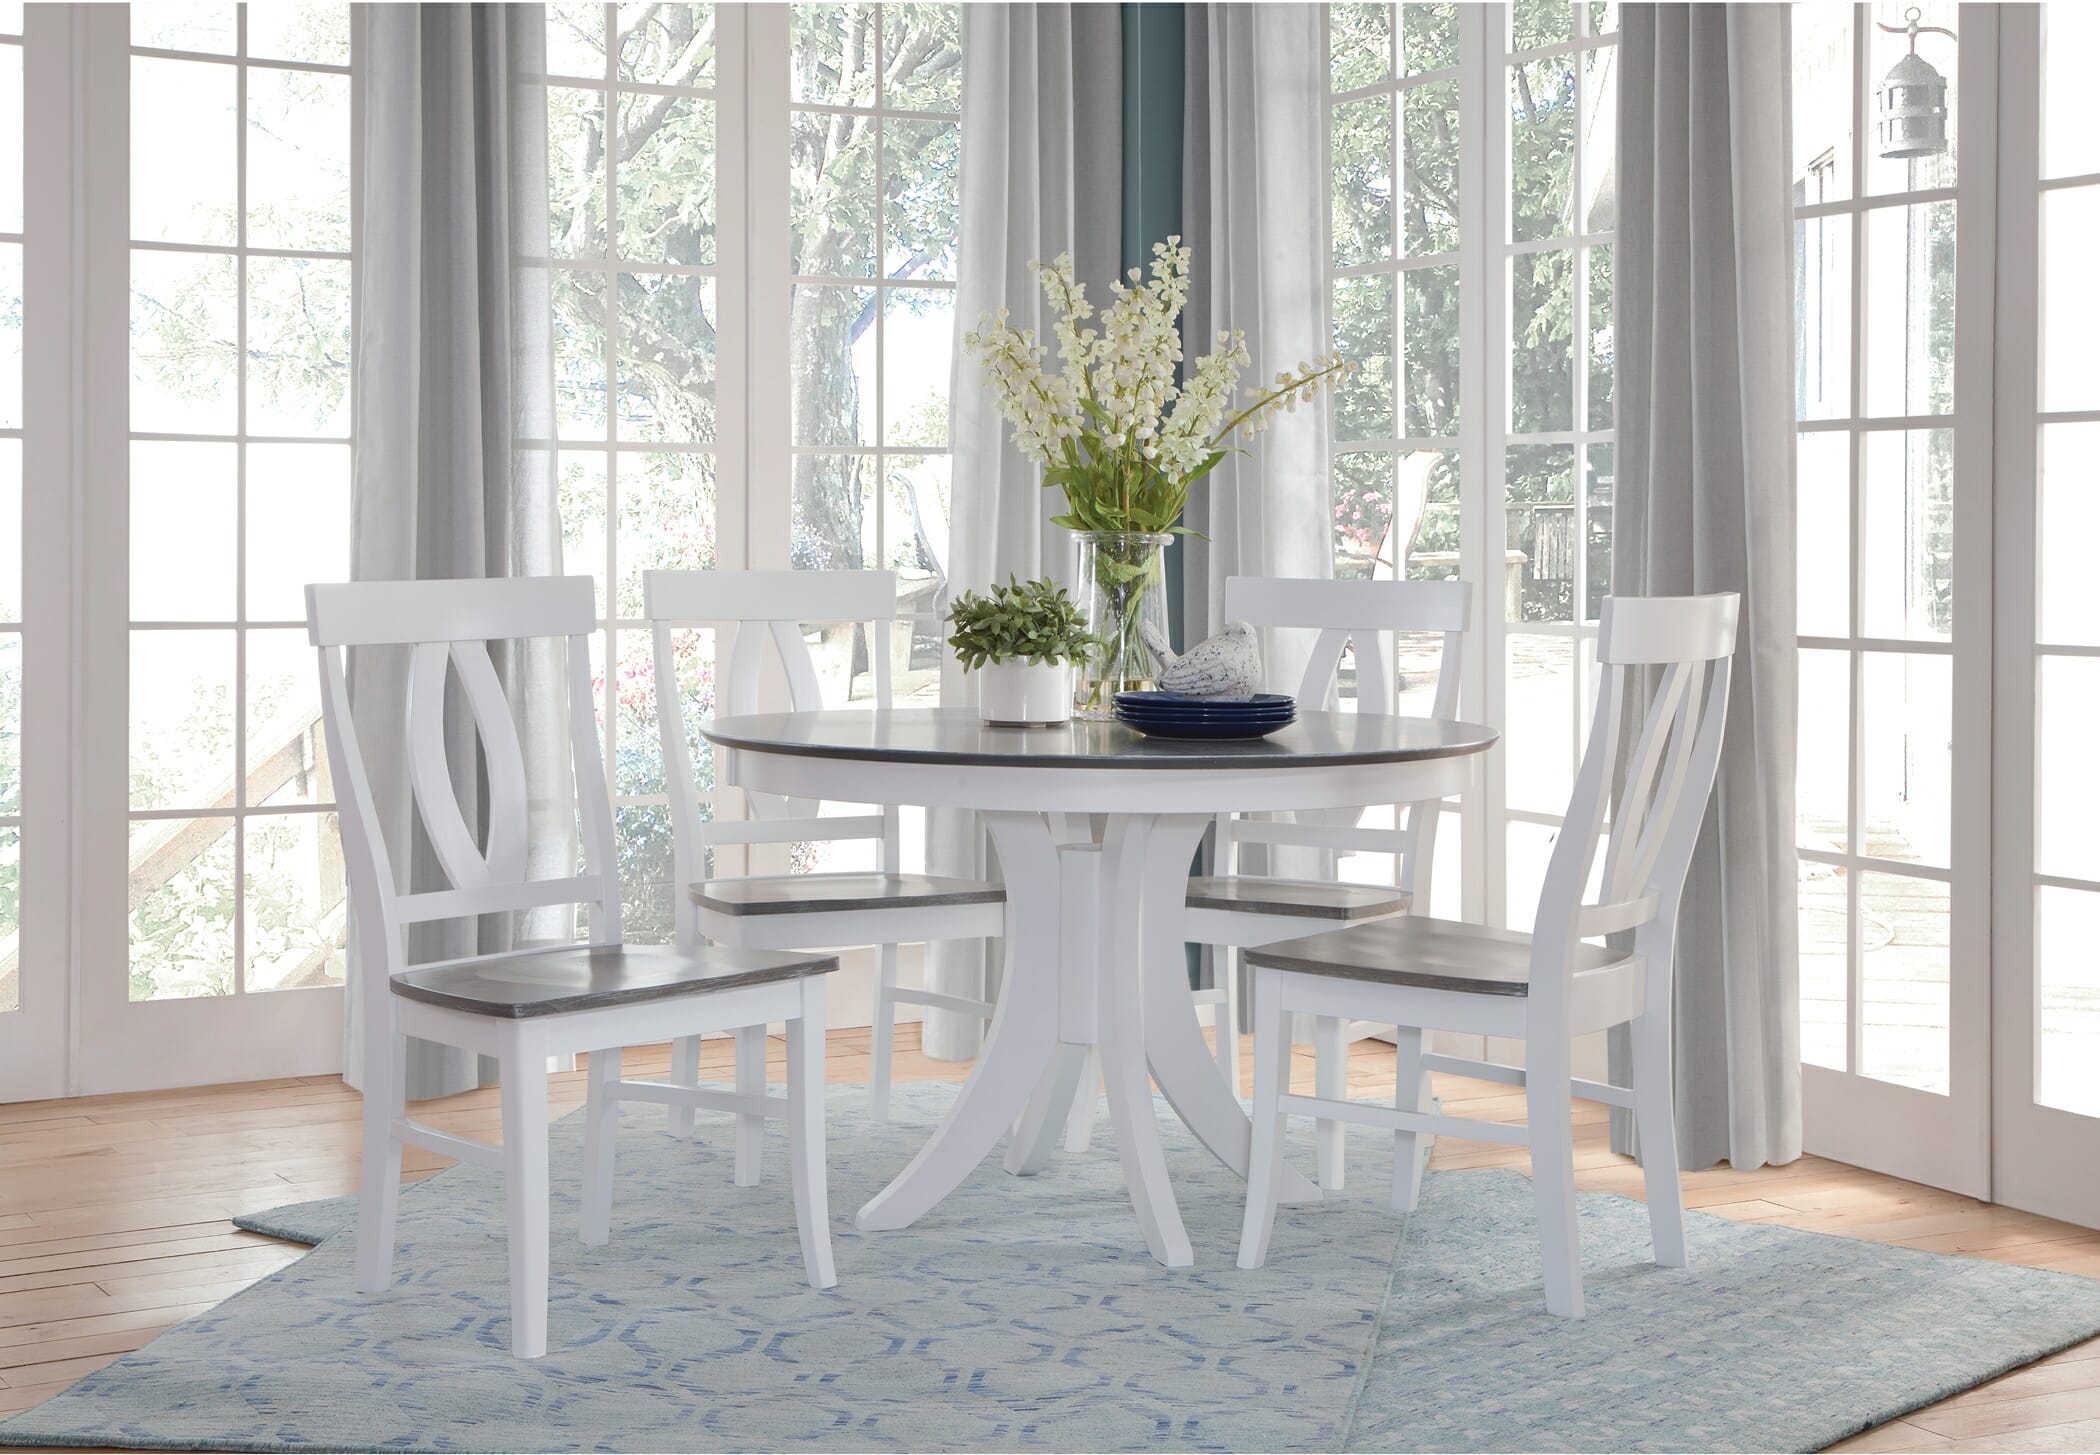 Ww59 Grey And White Round 5 Piece Set, Round Grey Dining Room Table And Chairs